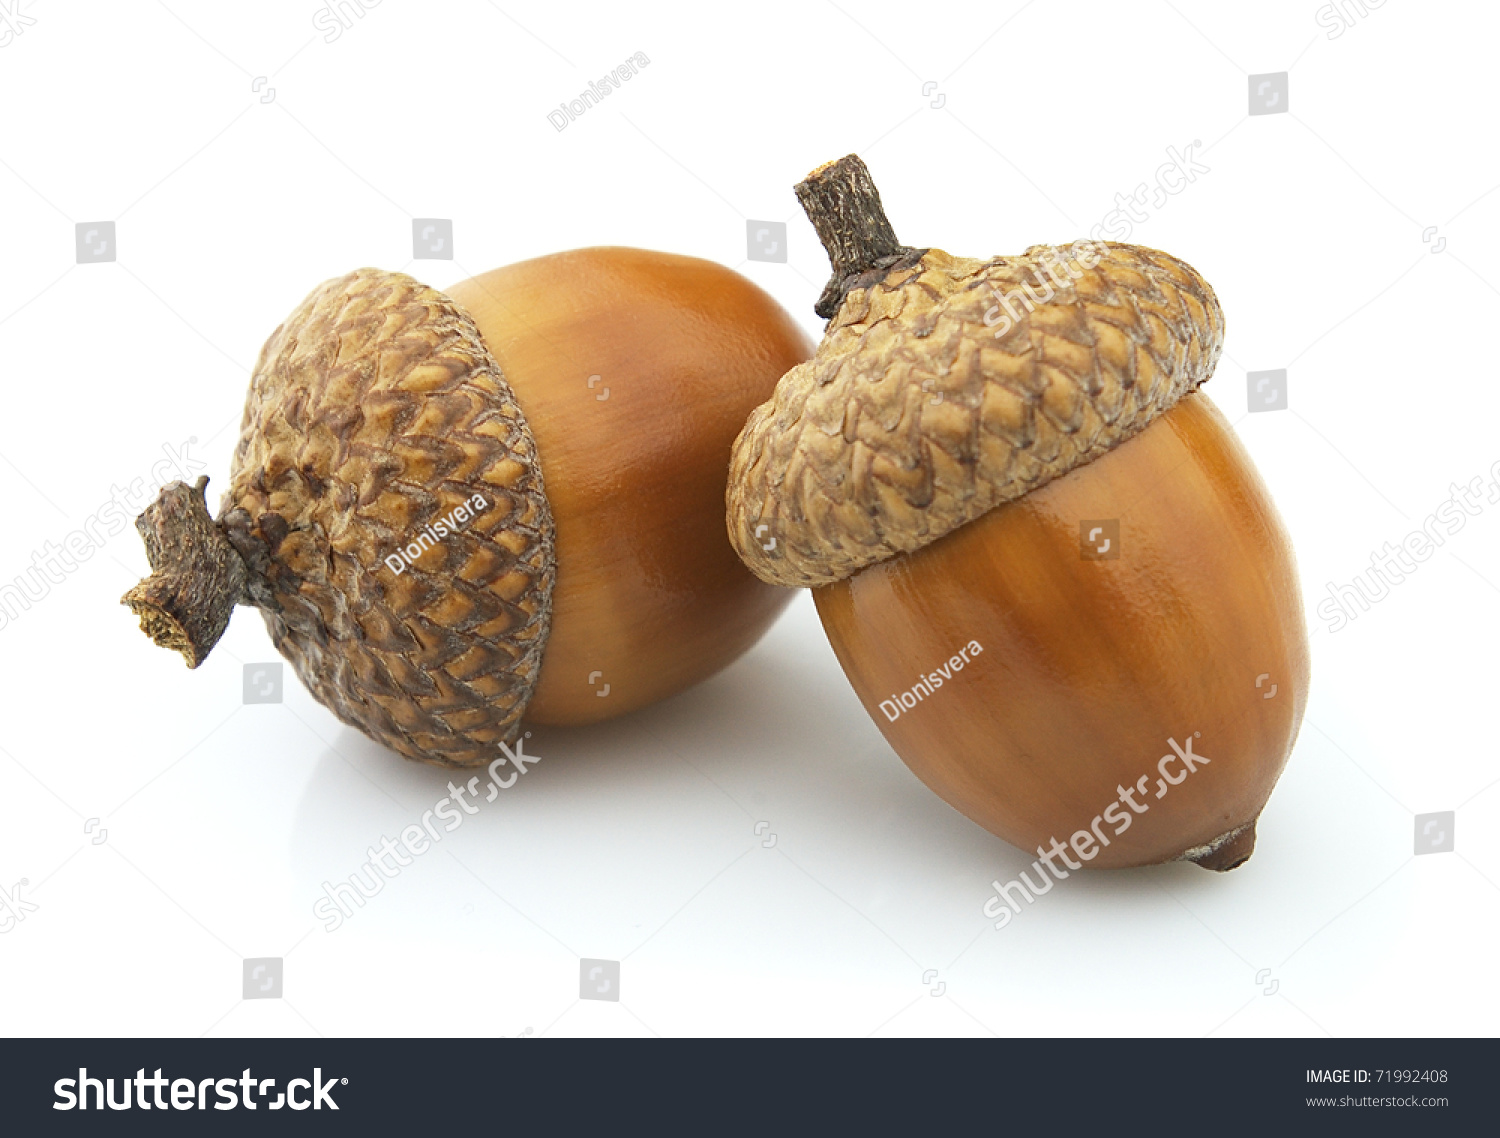 Two acorns on a white background #71992408